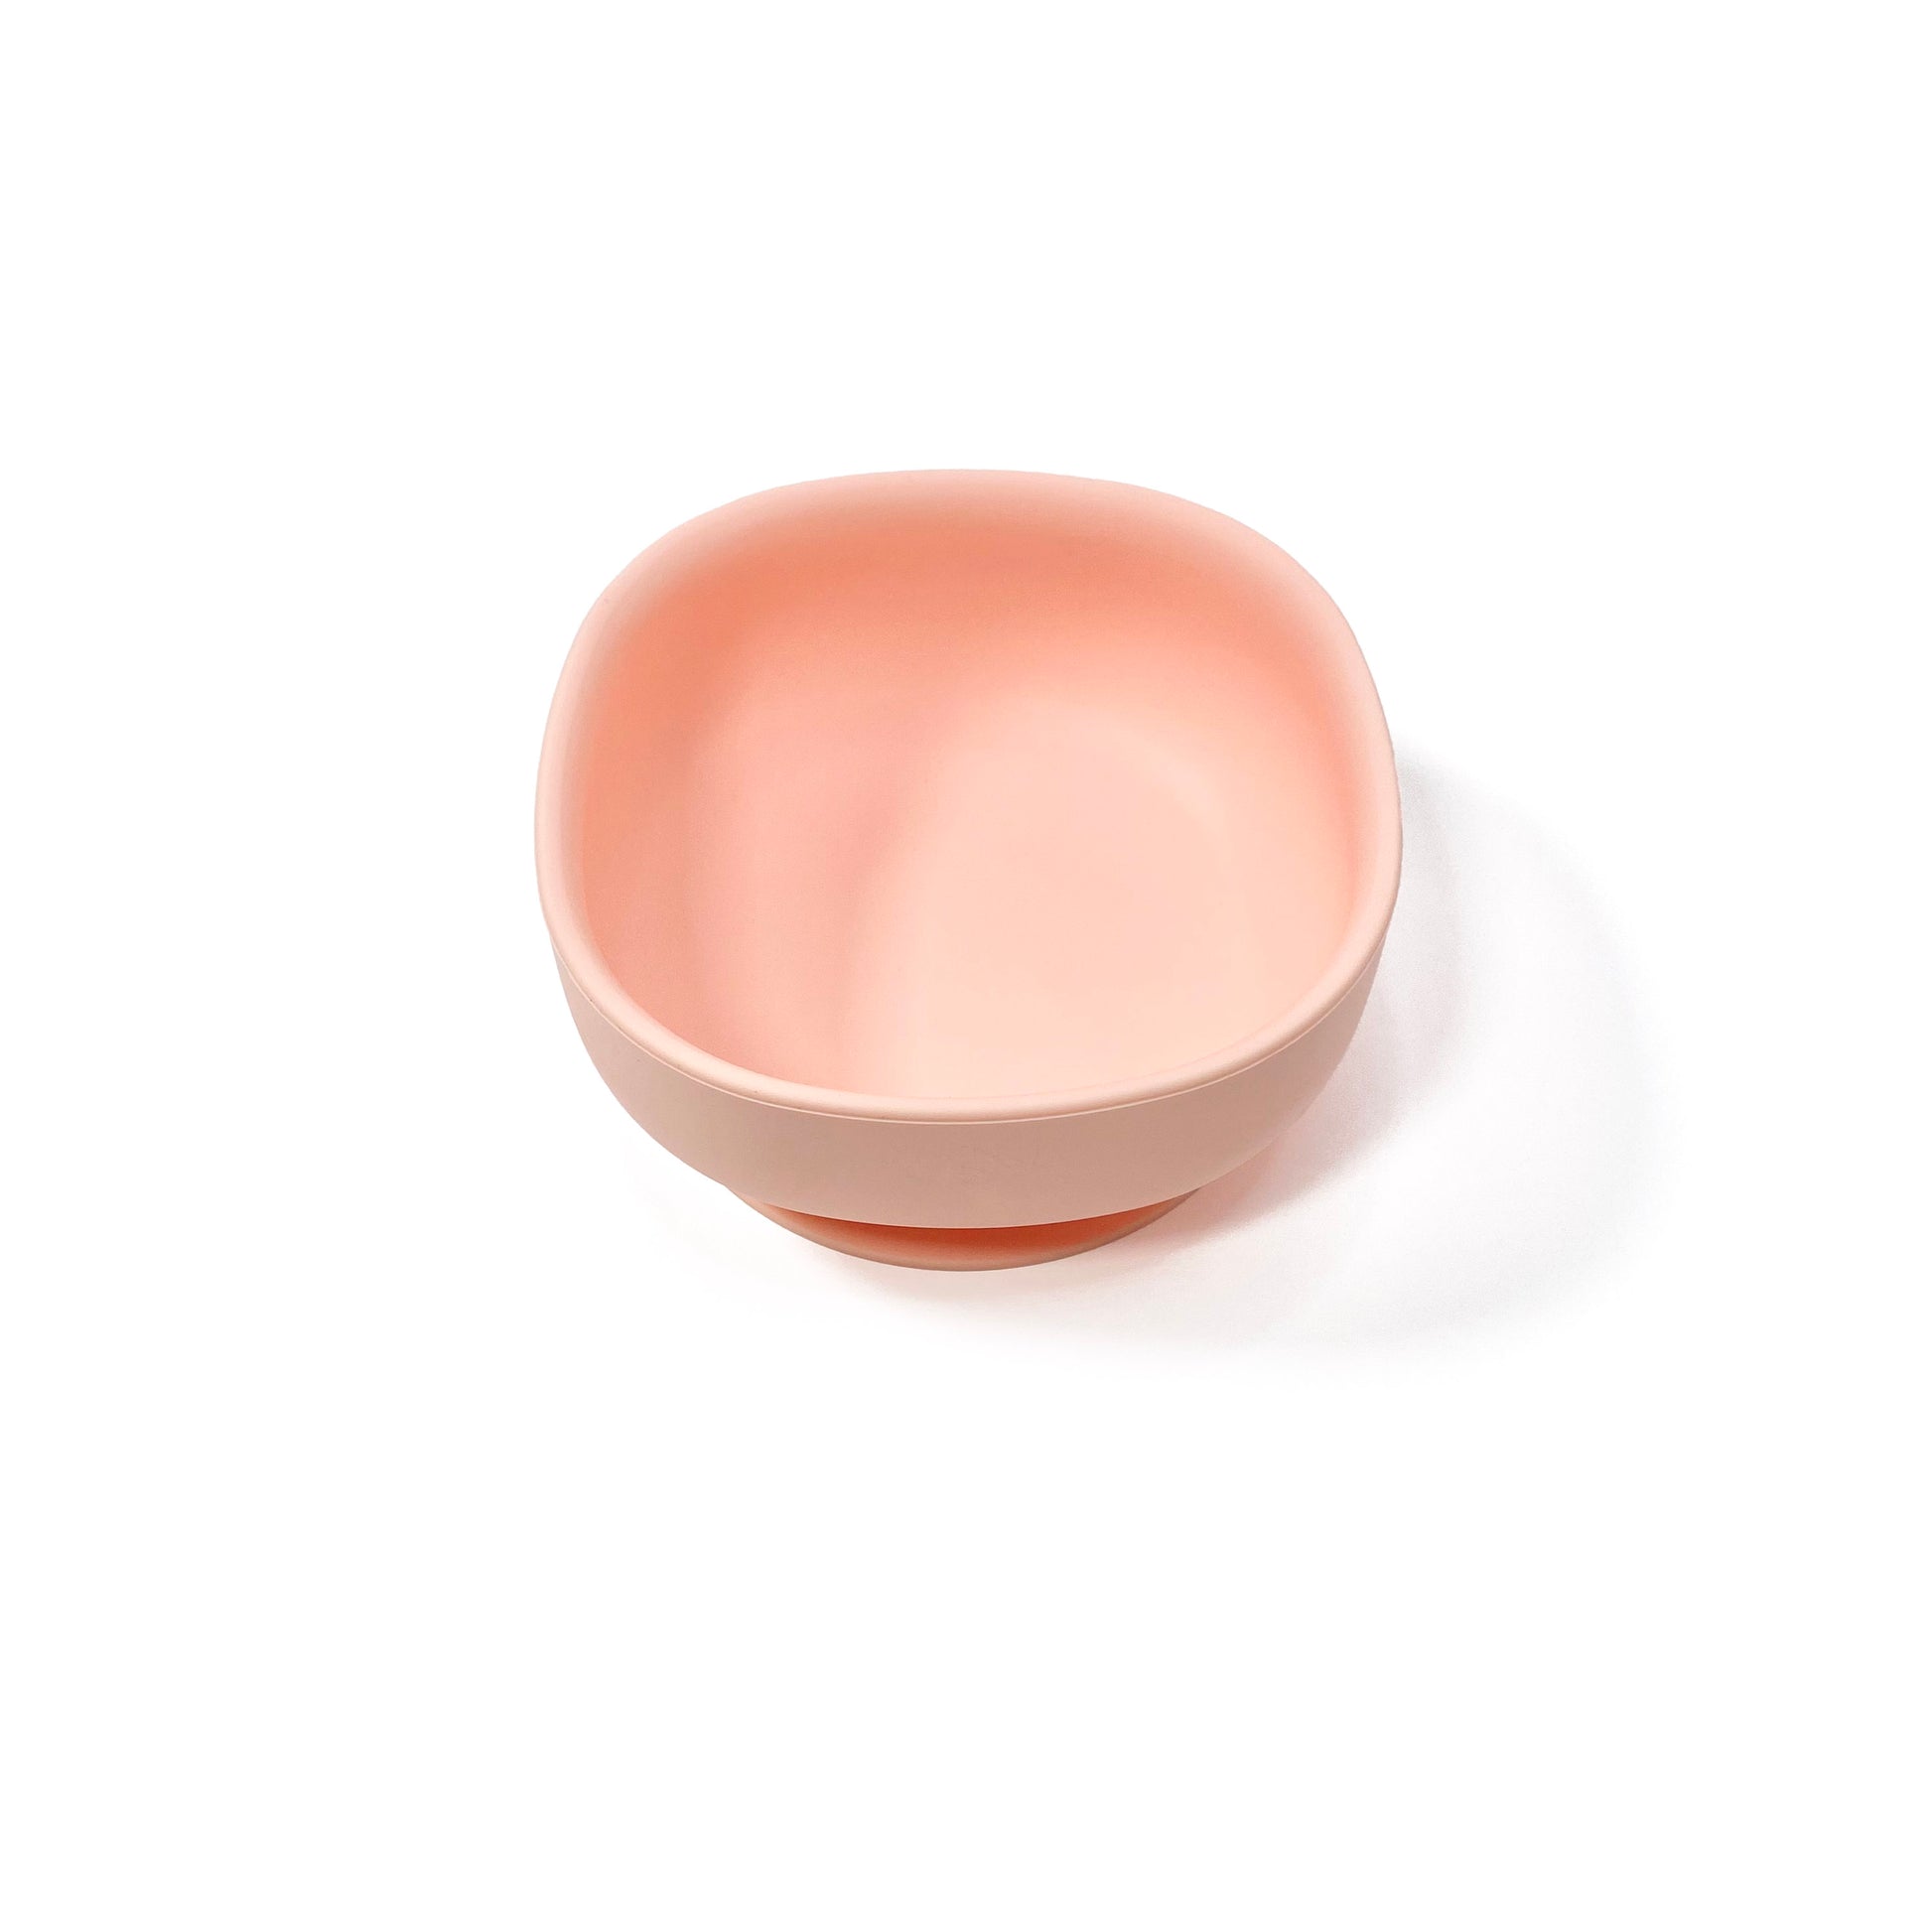 A peachy pink silicone children’s feeding bowl with suction cup on the base. Side view.